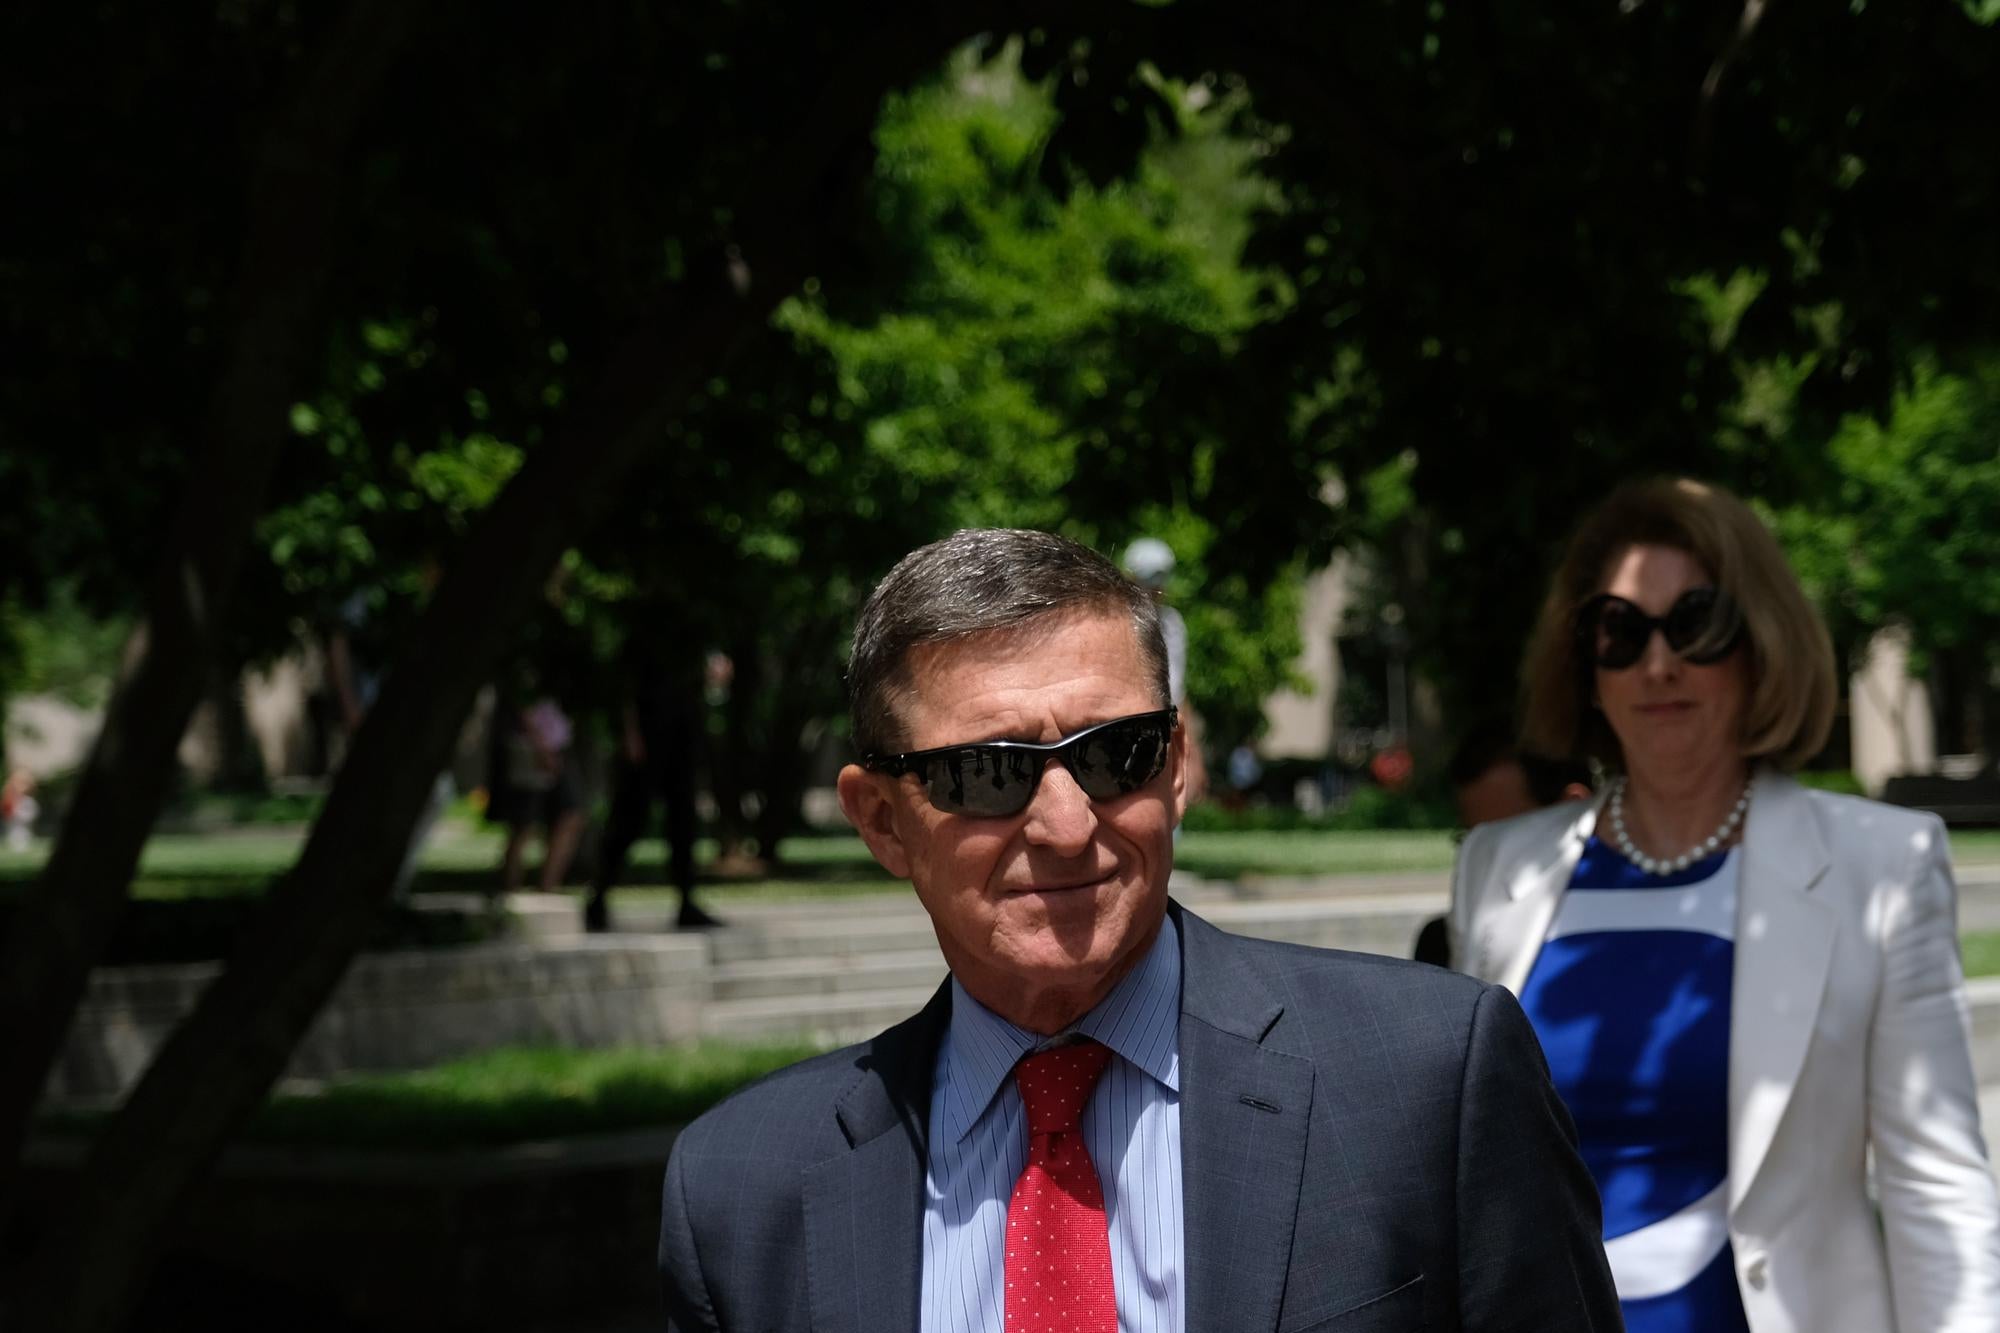 Michael Flynn wearing sunglasses and a suit and tie, with a woman in sunglasses walking behind him.